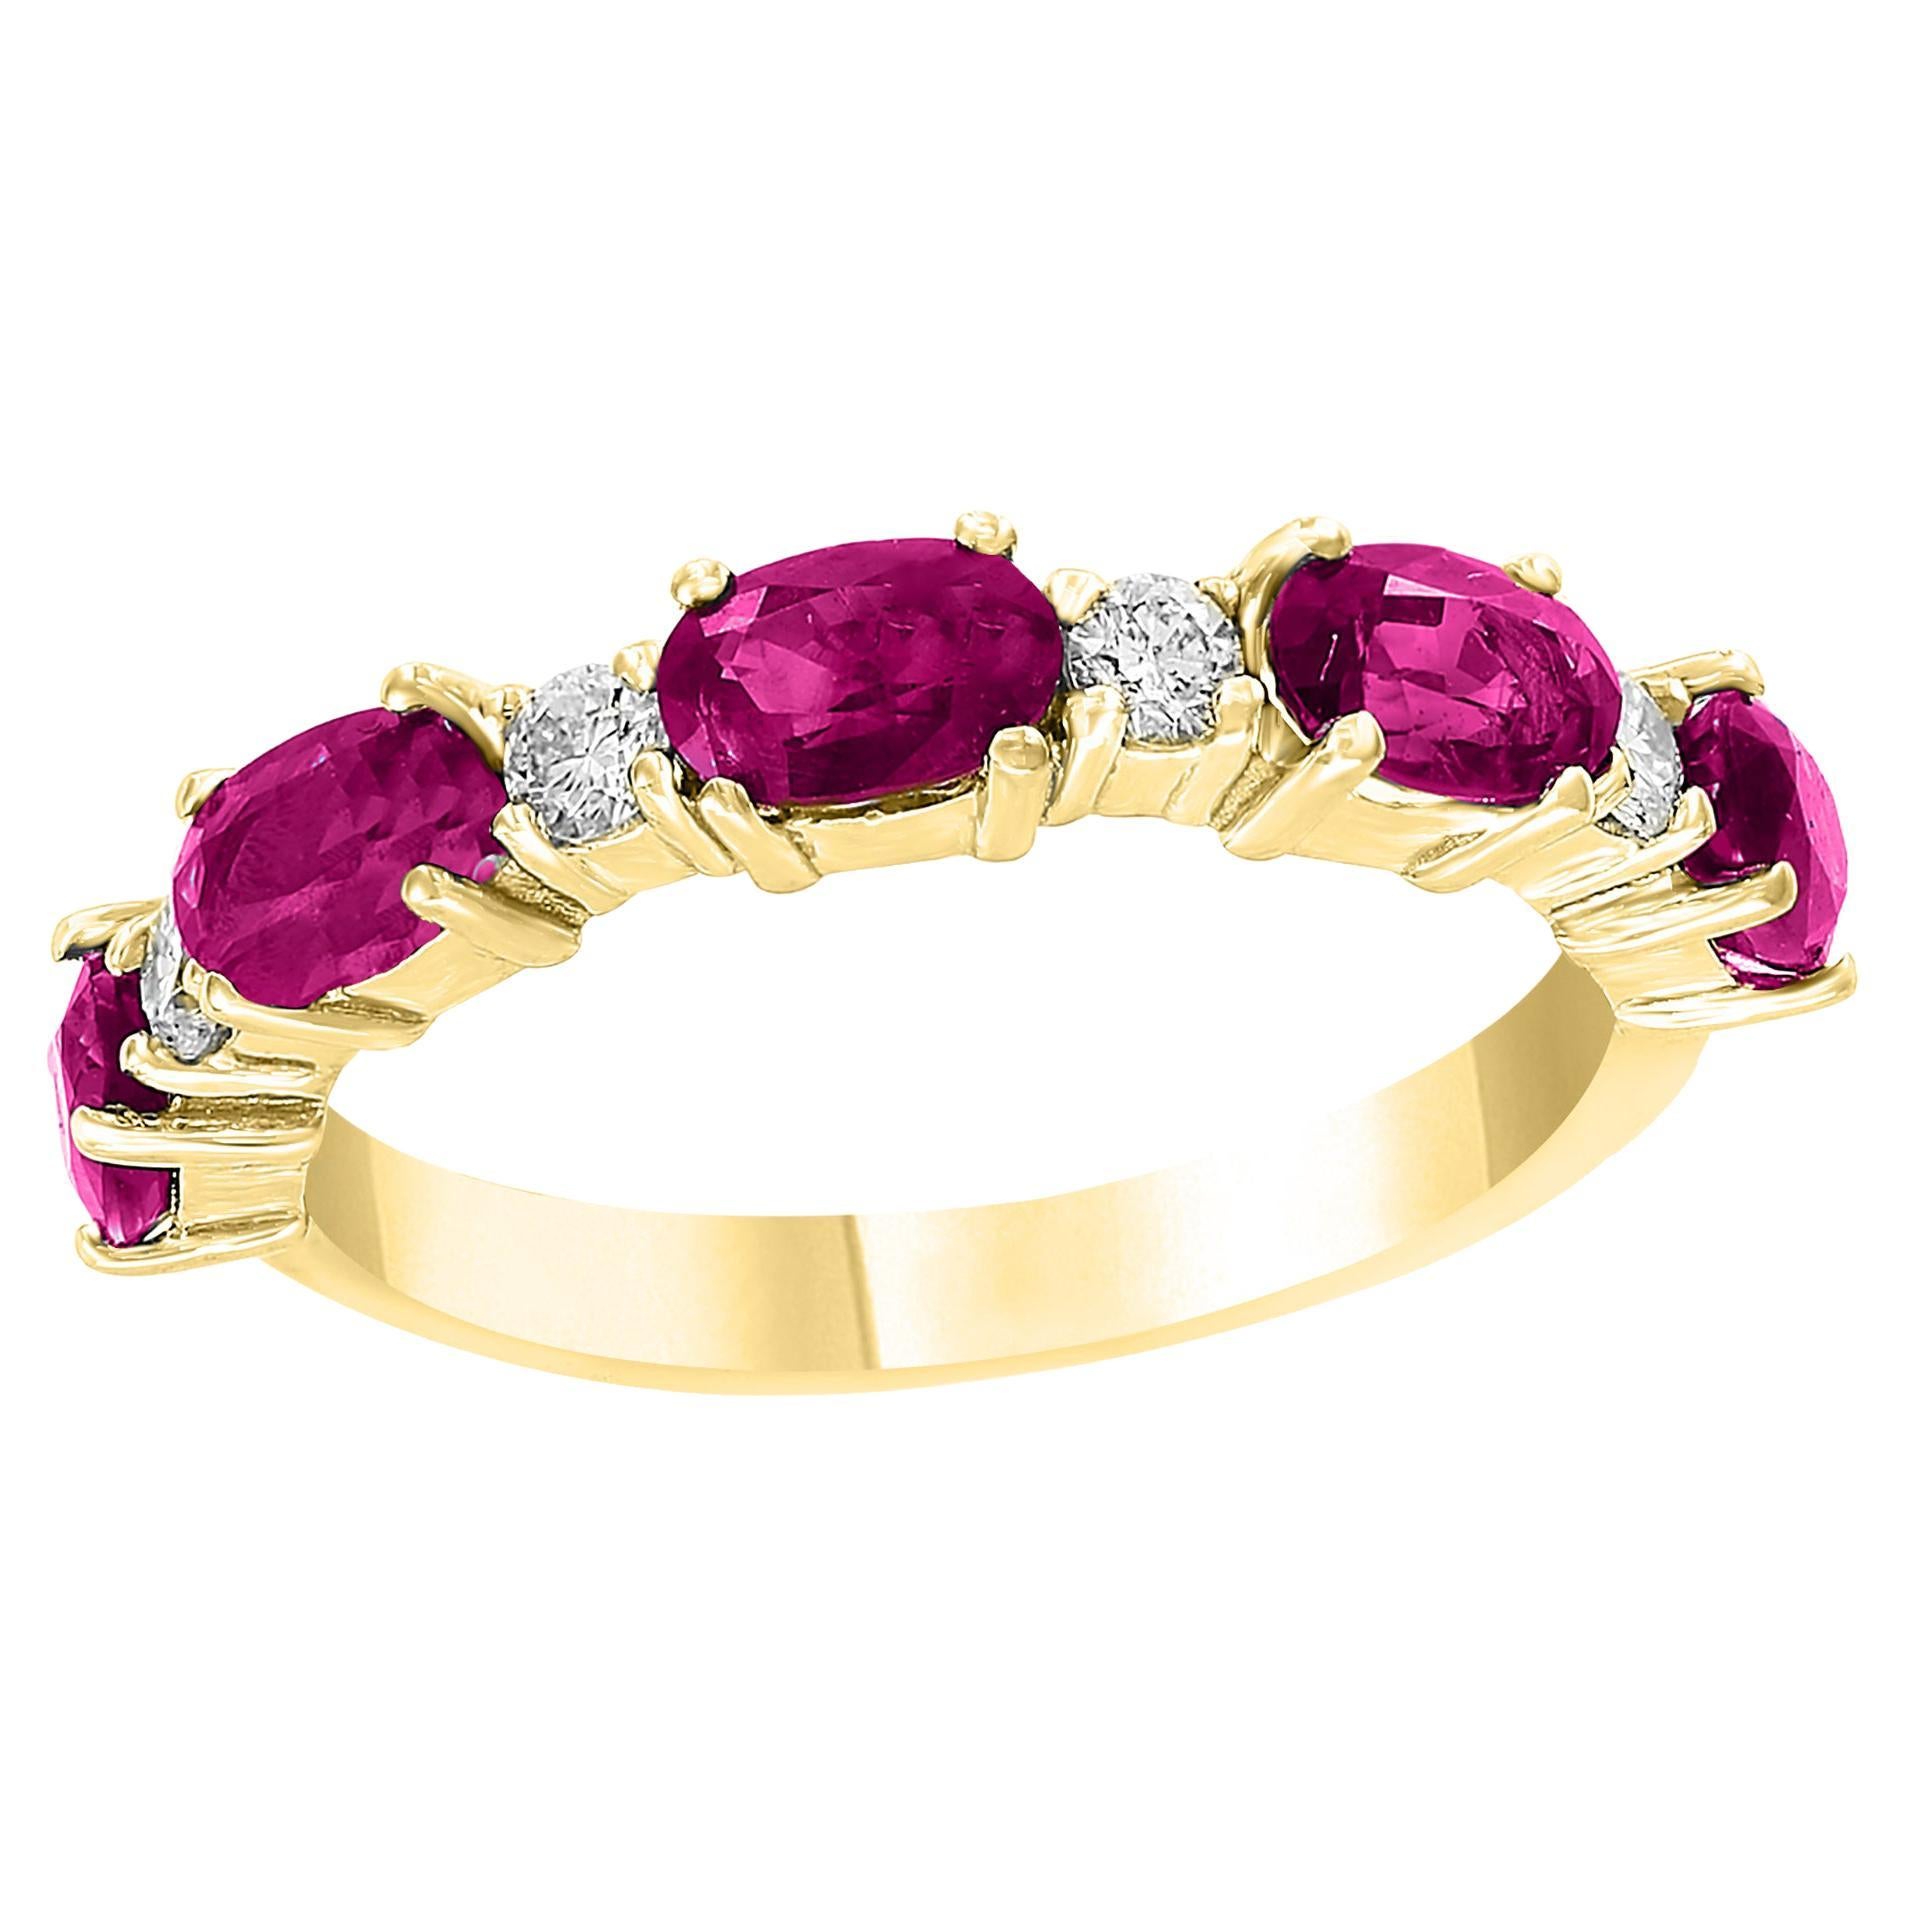 Dsnyu Ruby Stone Ring, Vintage Jewelry Rings Rose Gold Oval Shape Wedding  Ring with 0.5ct Ruby Halo Comfort Fit Size H 1/2 : Amazon.co.uk: Fashion